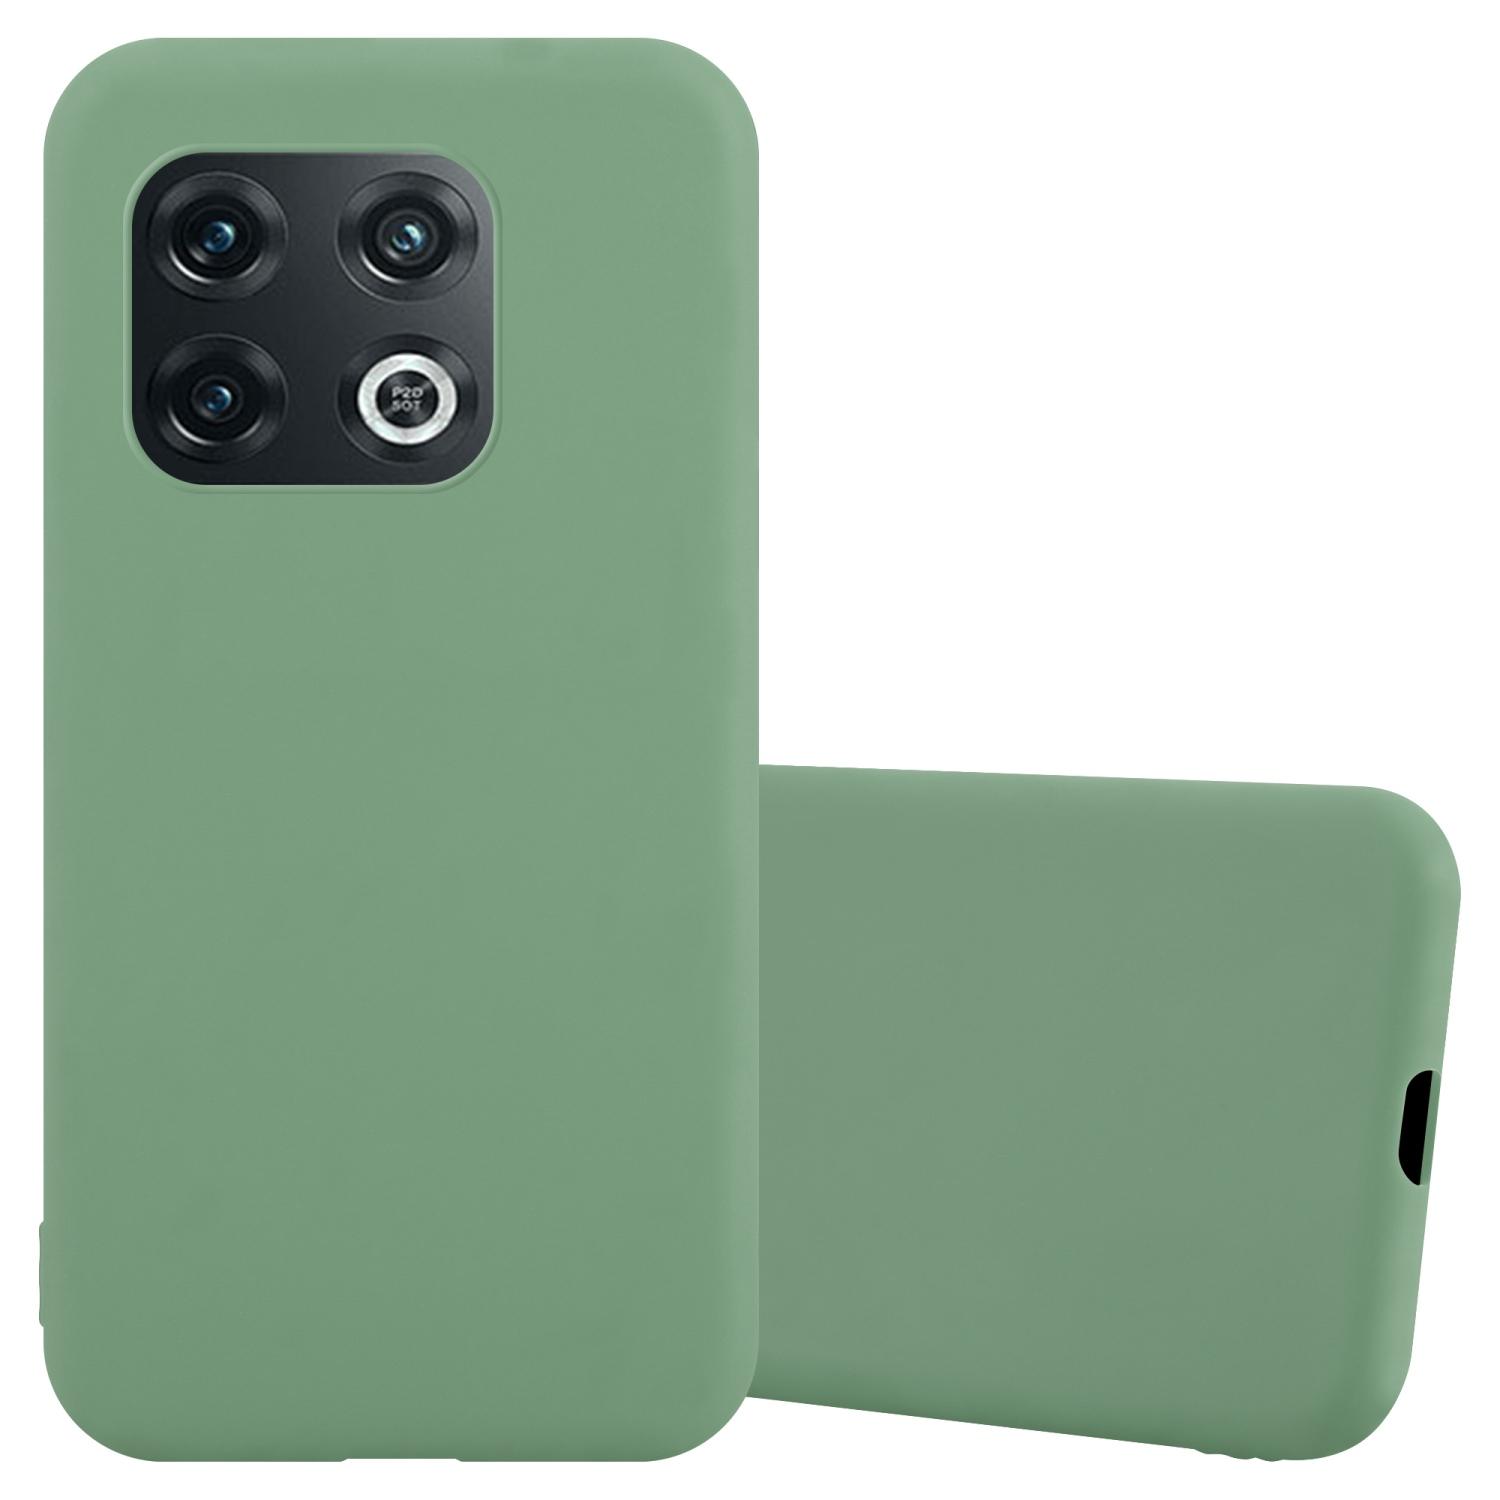 Style, PRO 5G, GRÜN CADORABO im CANDY OnePlus, TPU PASTELL Candy 10 Hülle Backcover,